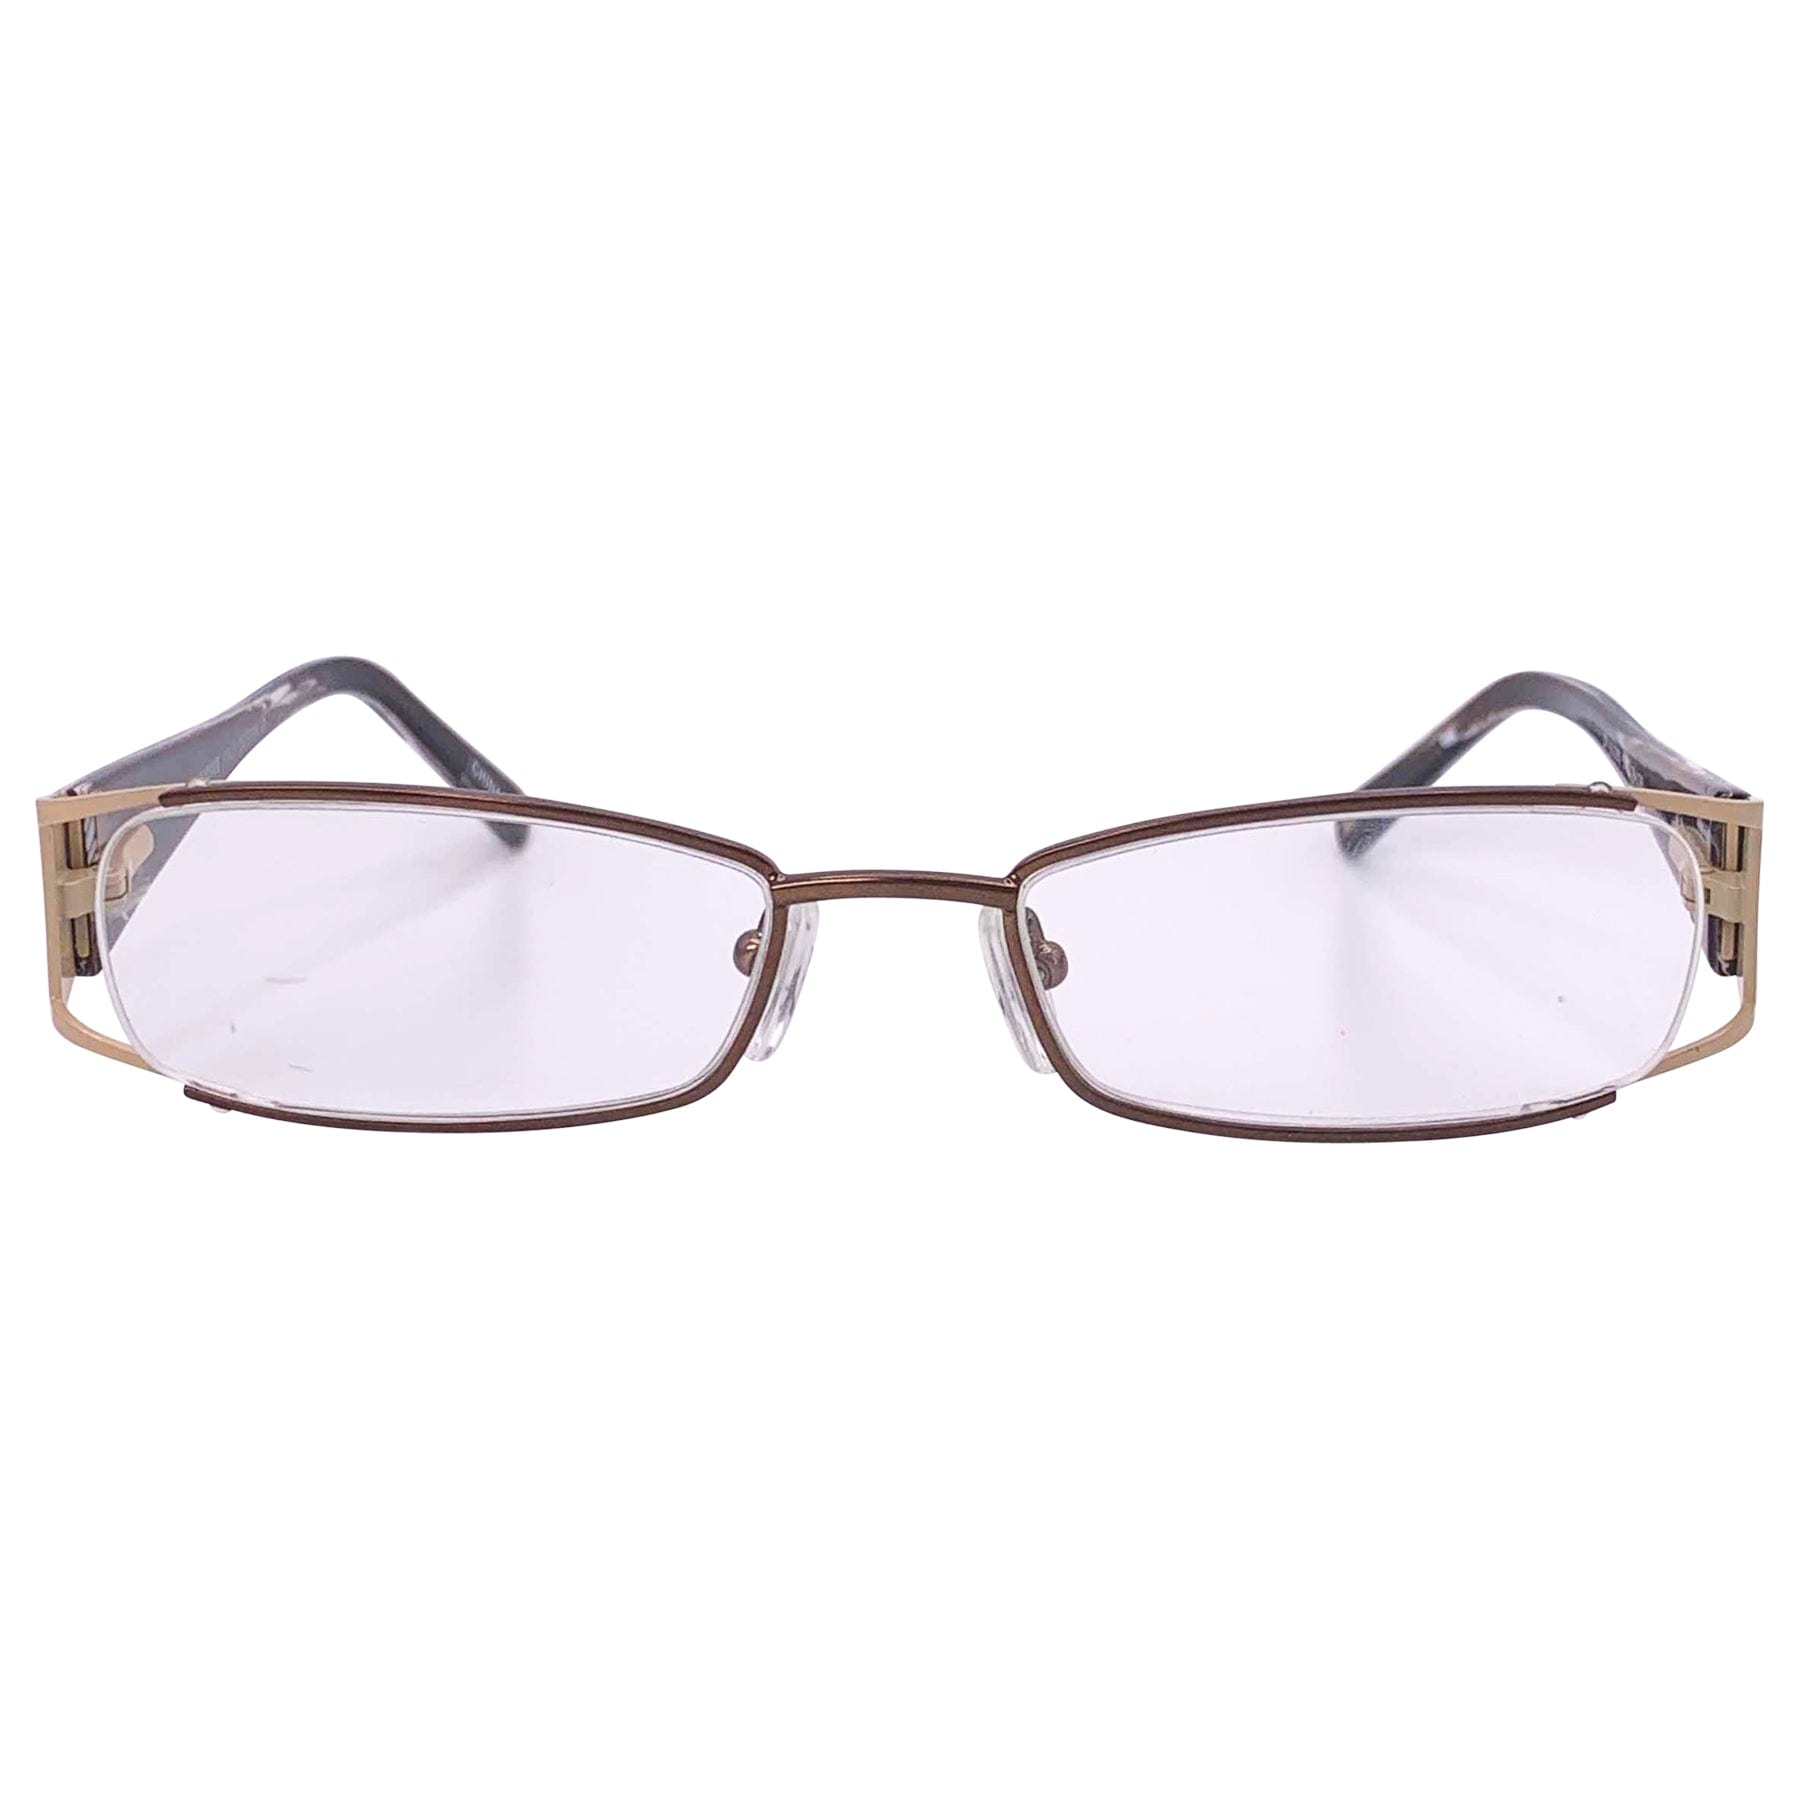 clear retro glasses with a 90s tan frame style 